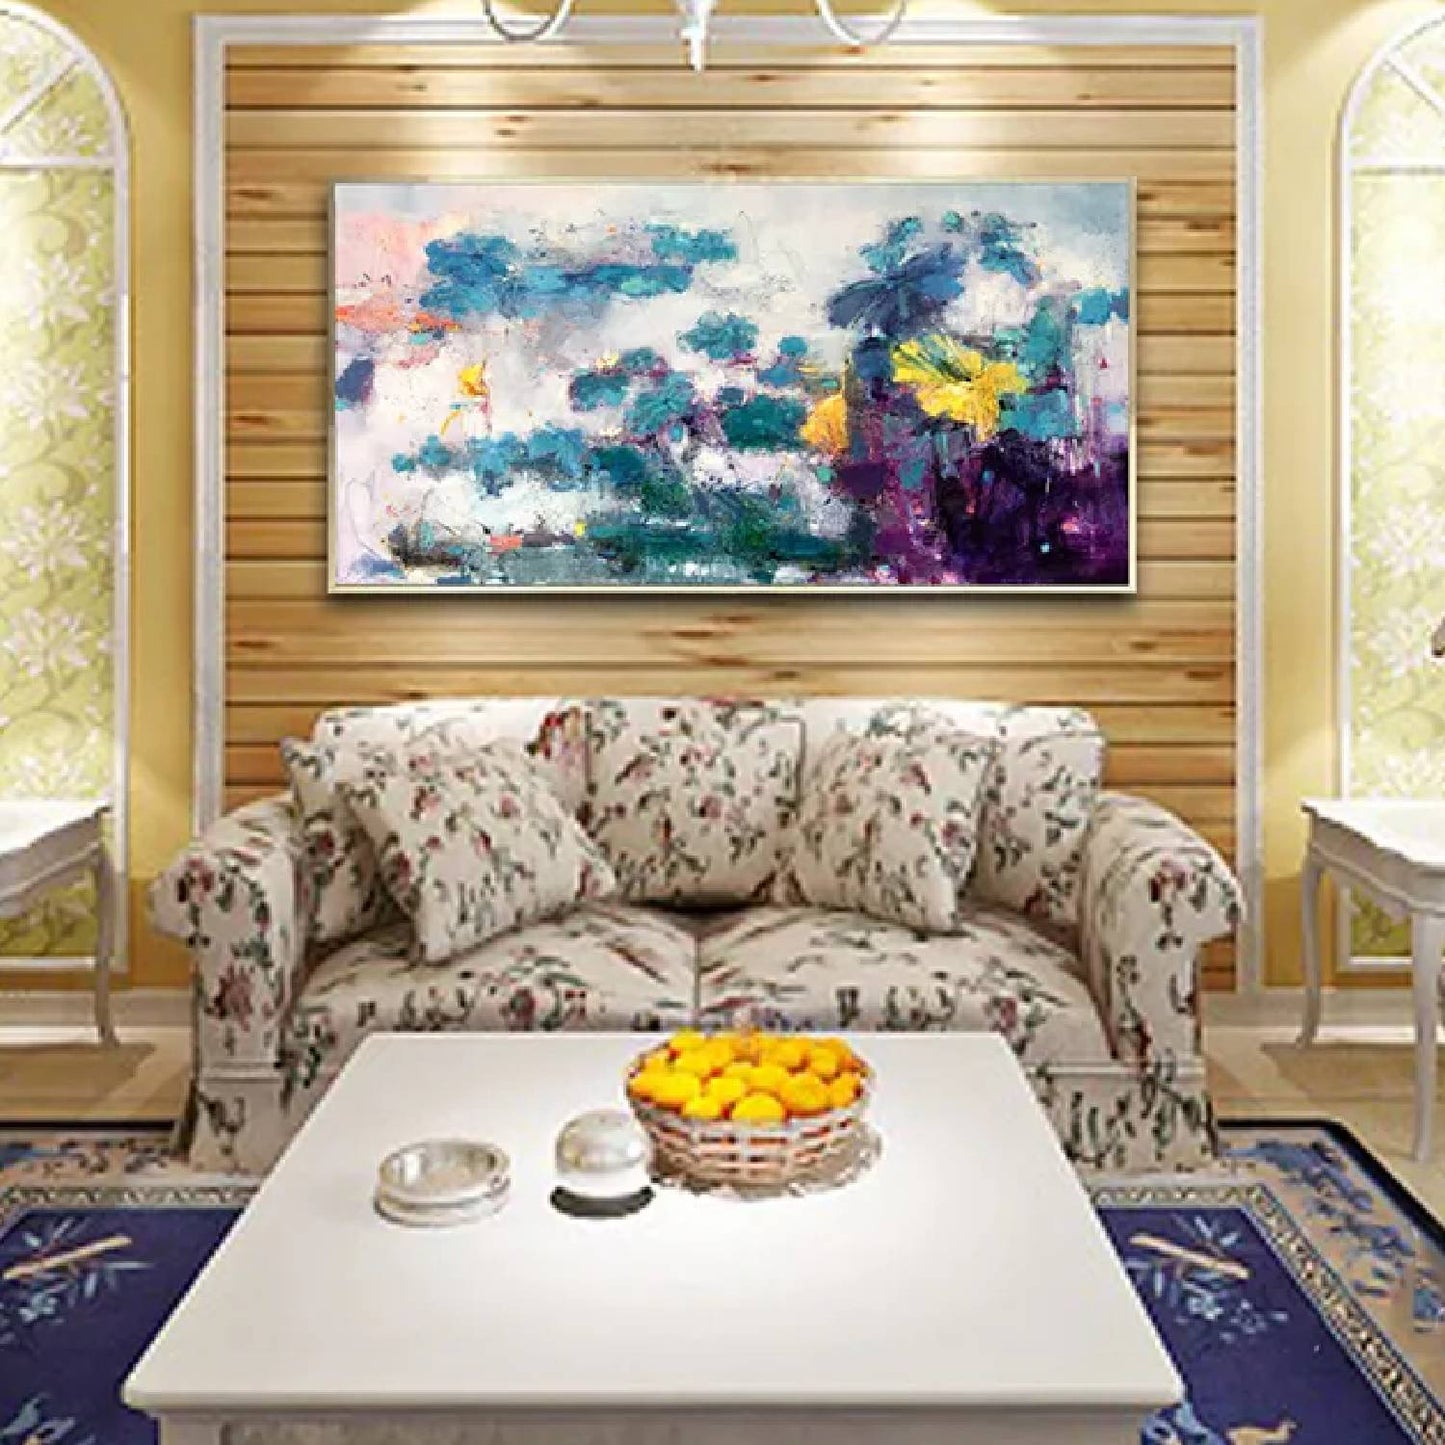 Abstract Blue Contemporary Flowers Wall Painting